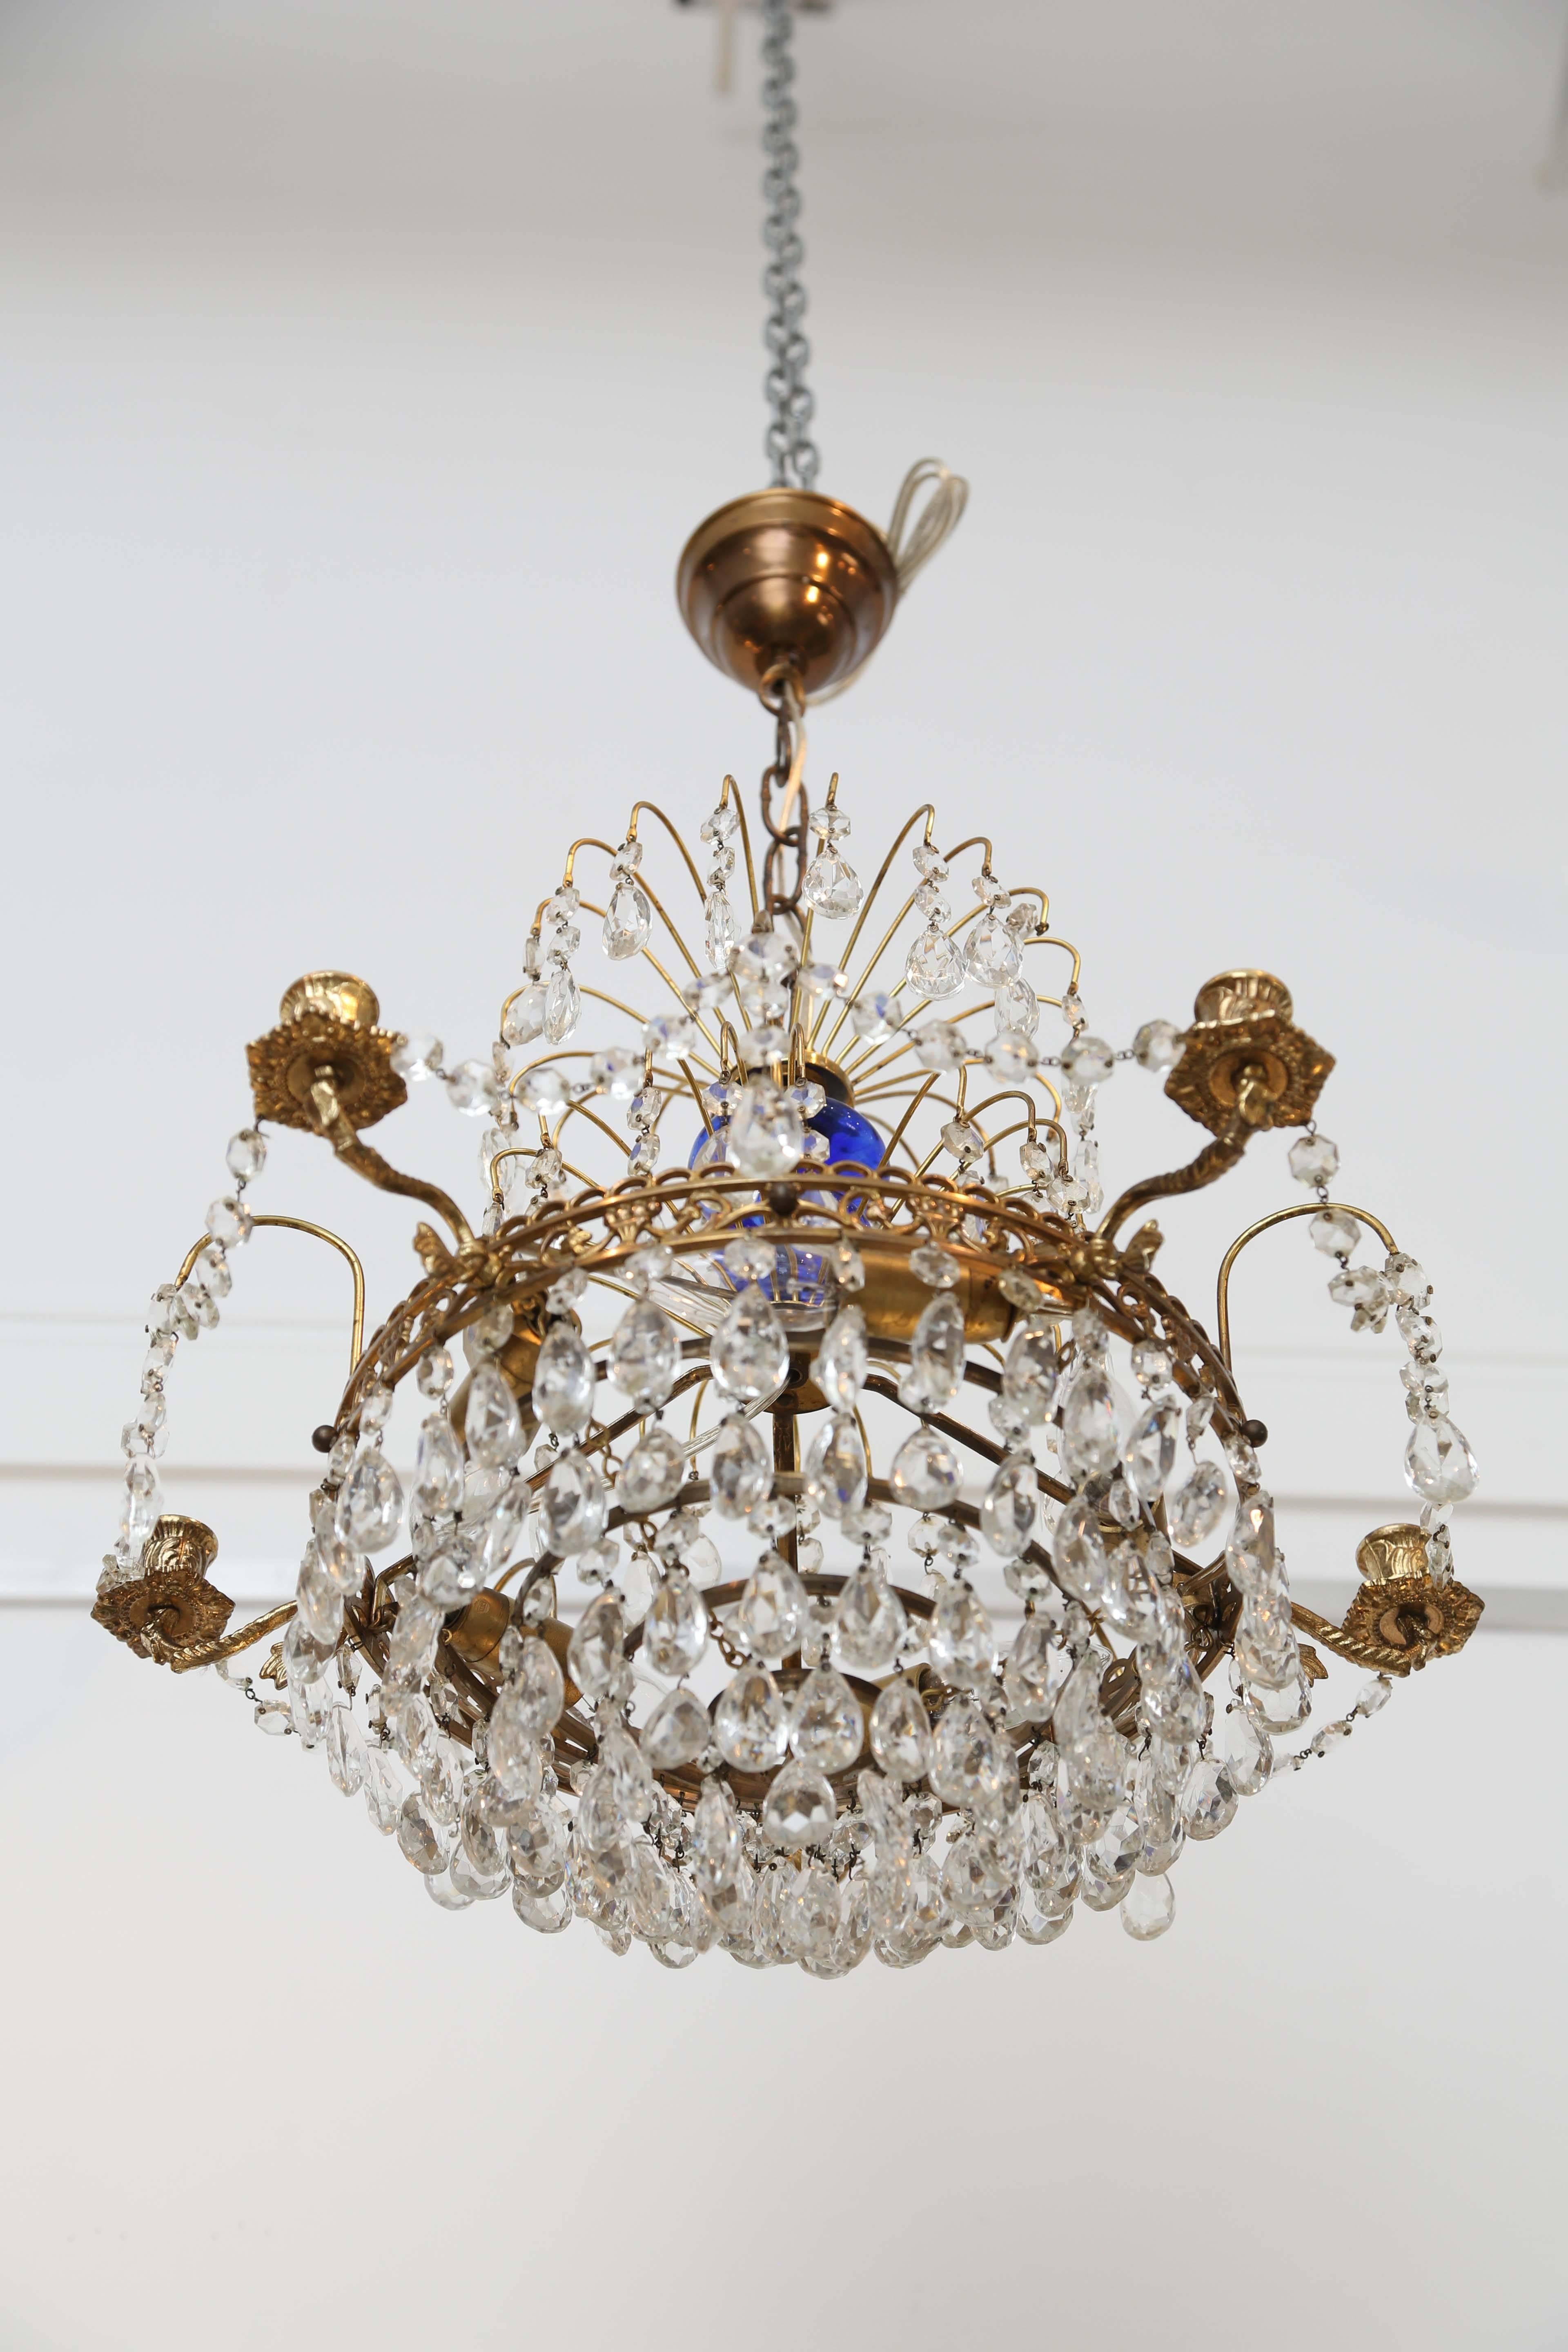 Lovely smaller scale Antique Swedish Louis XVI style brass and crystal chandelier, blue glass centerpiece mounted in the middle of fixture. Five brass candle arms mounted to the carved brass frame.
Five inside candelabra 40 watt max bulbs around